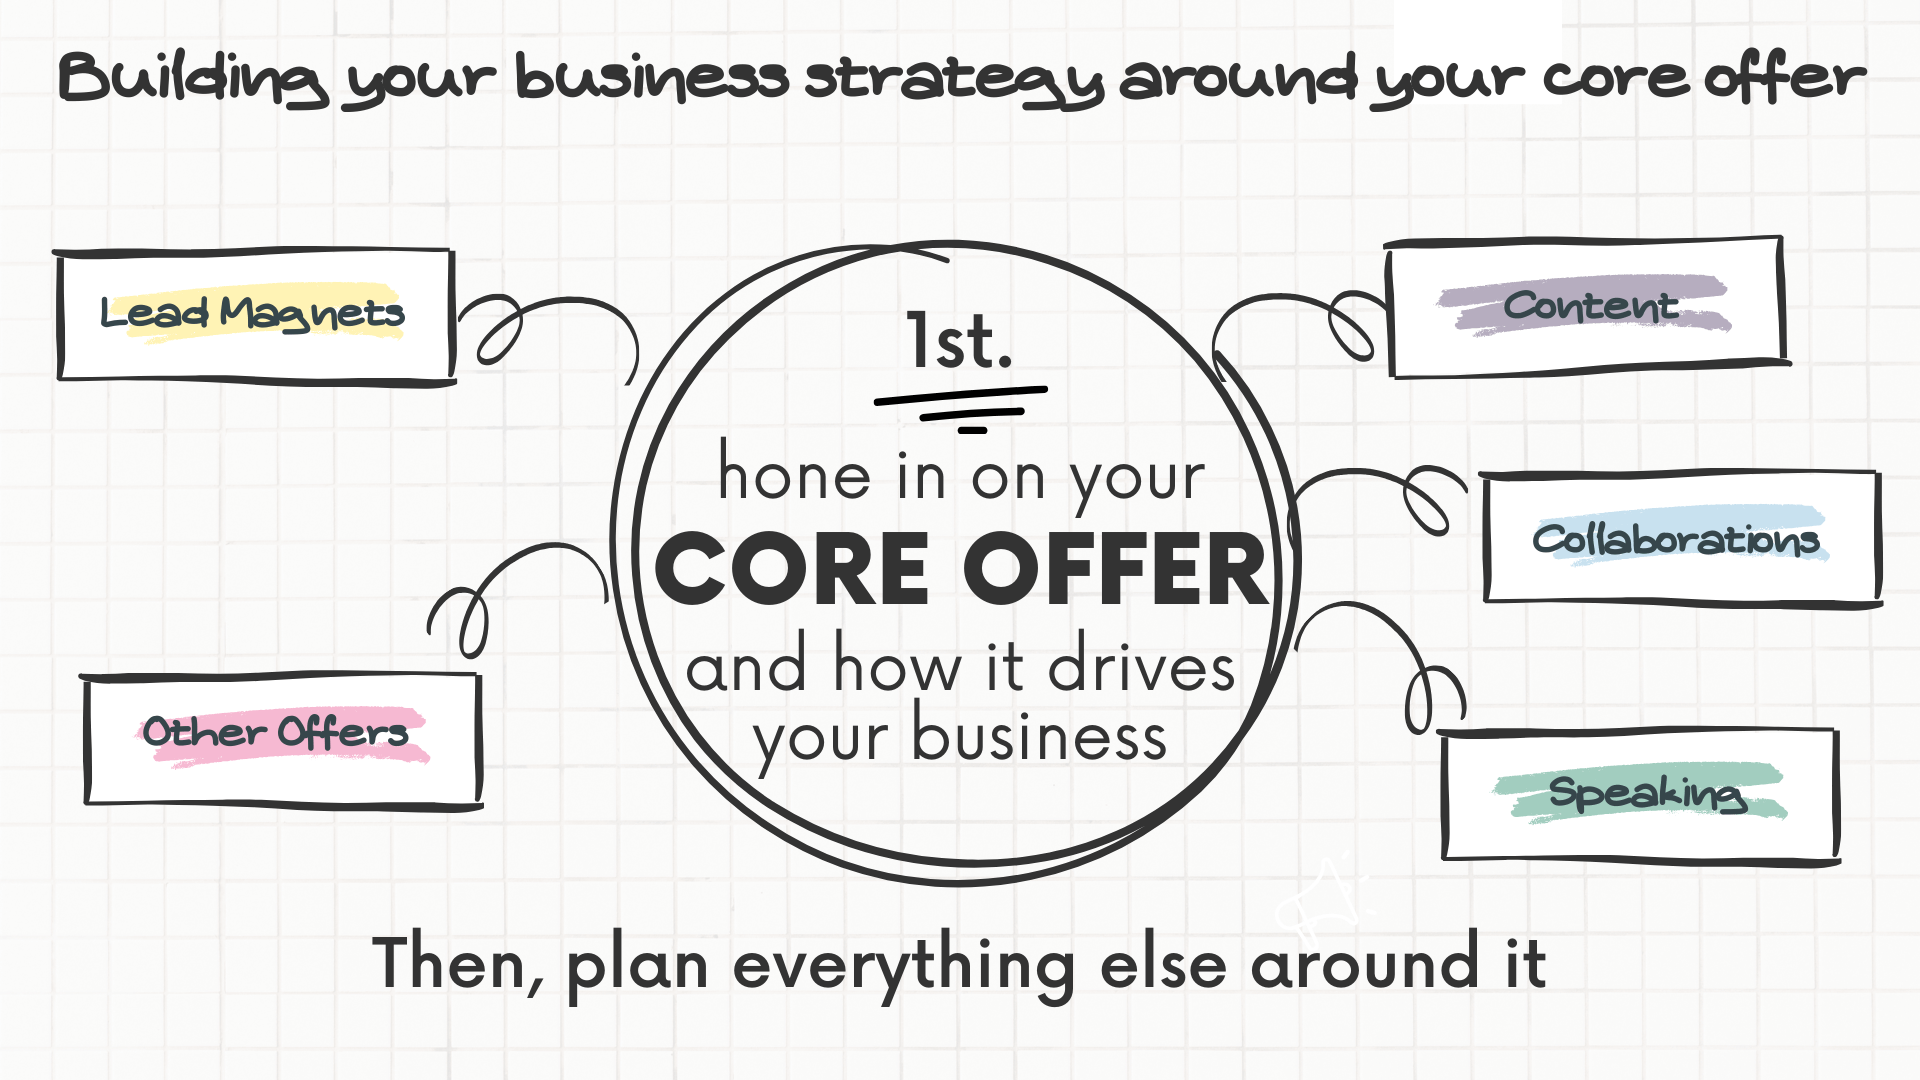 Building your business strategy around your core offer: 1st hone in on your core offer and how it drives your business. Then, plan everything else around it--lead magnets, other offers, content, speaking, collaborations.